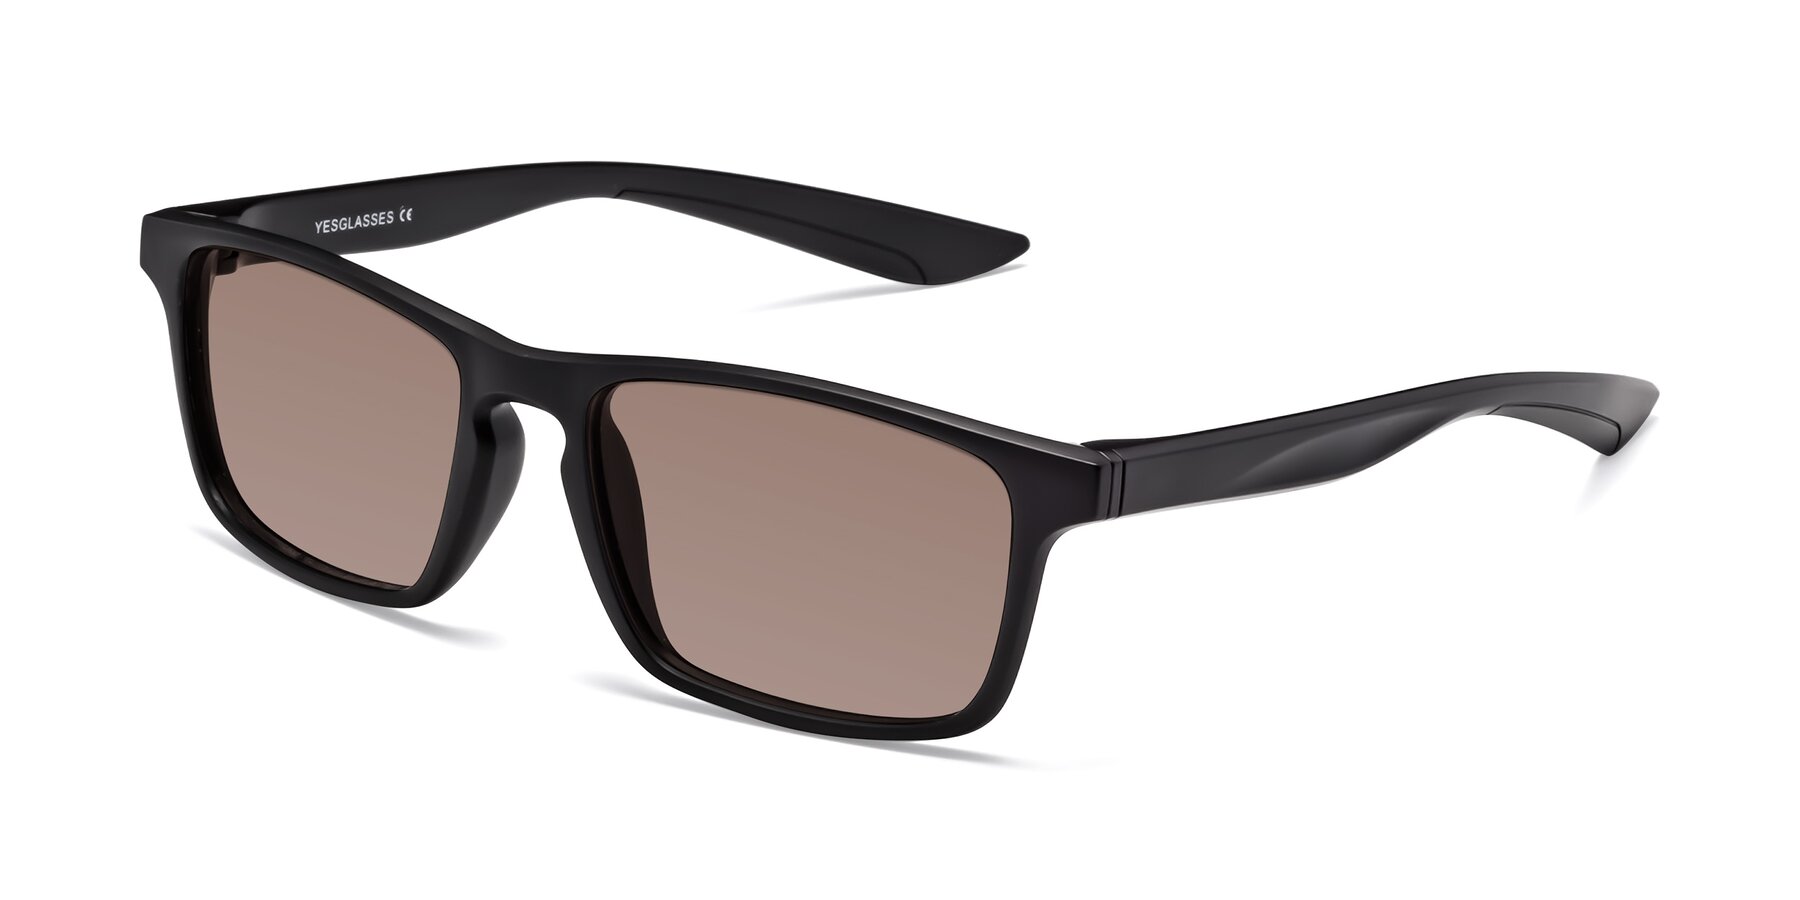 Angle of Passion in Matte Black with Medium Brown Tinted Lenses